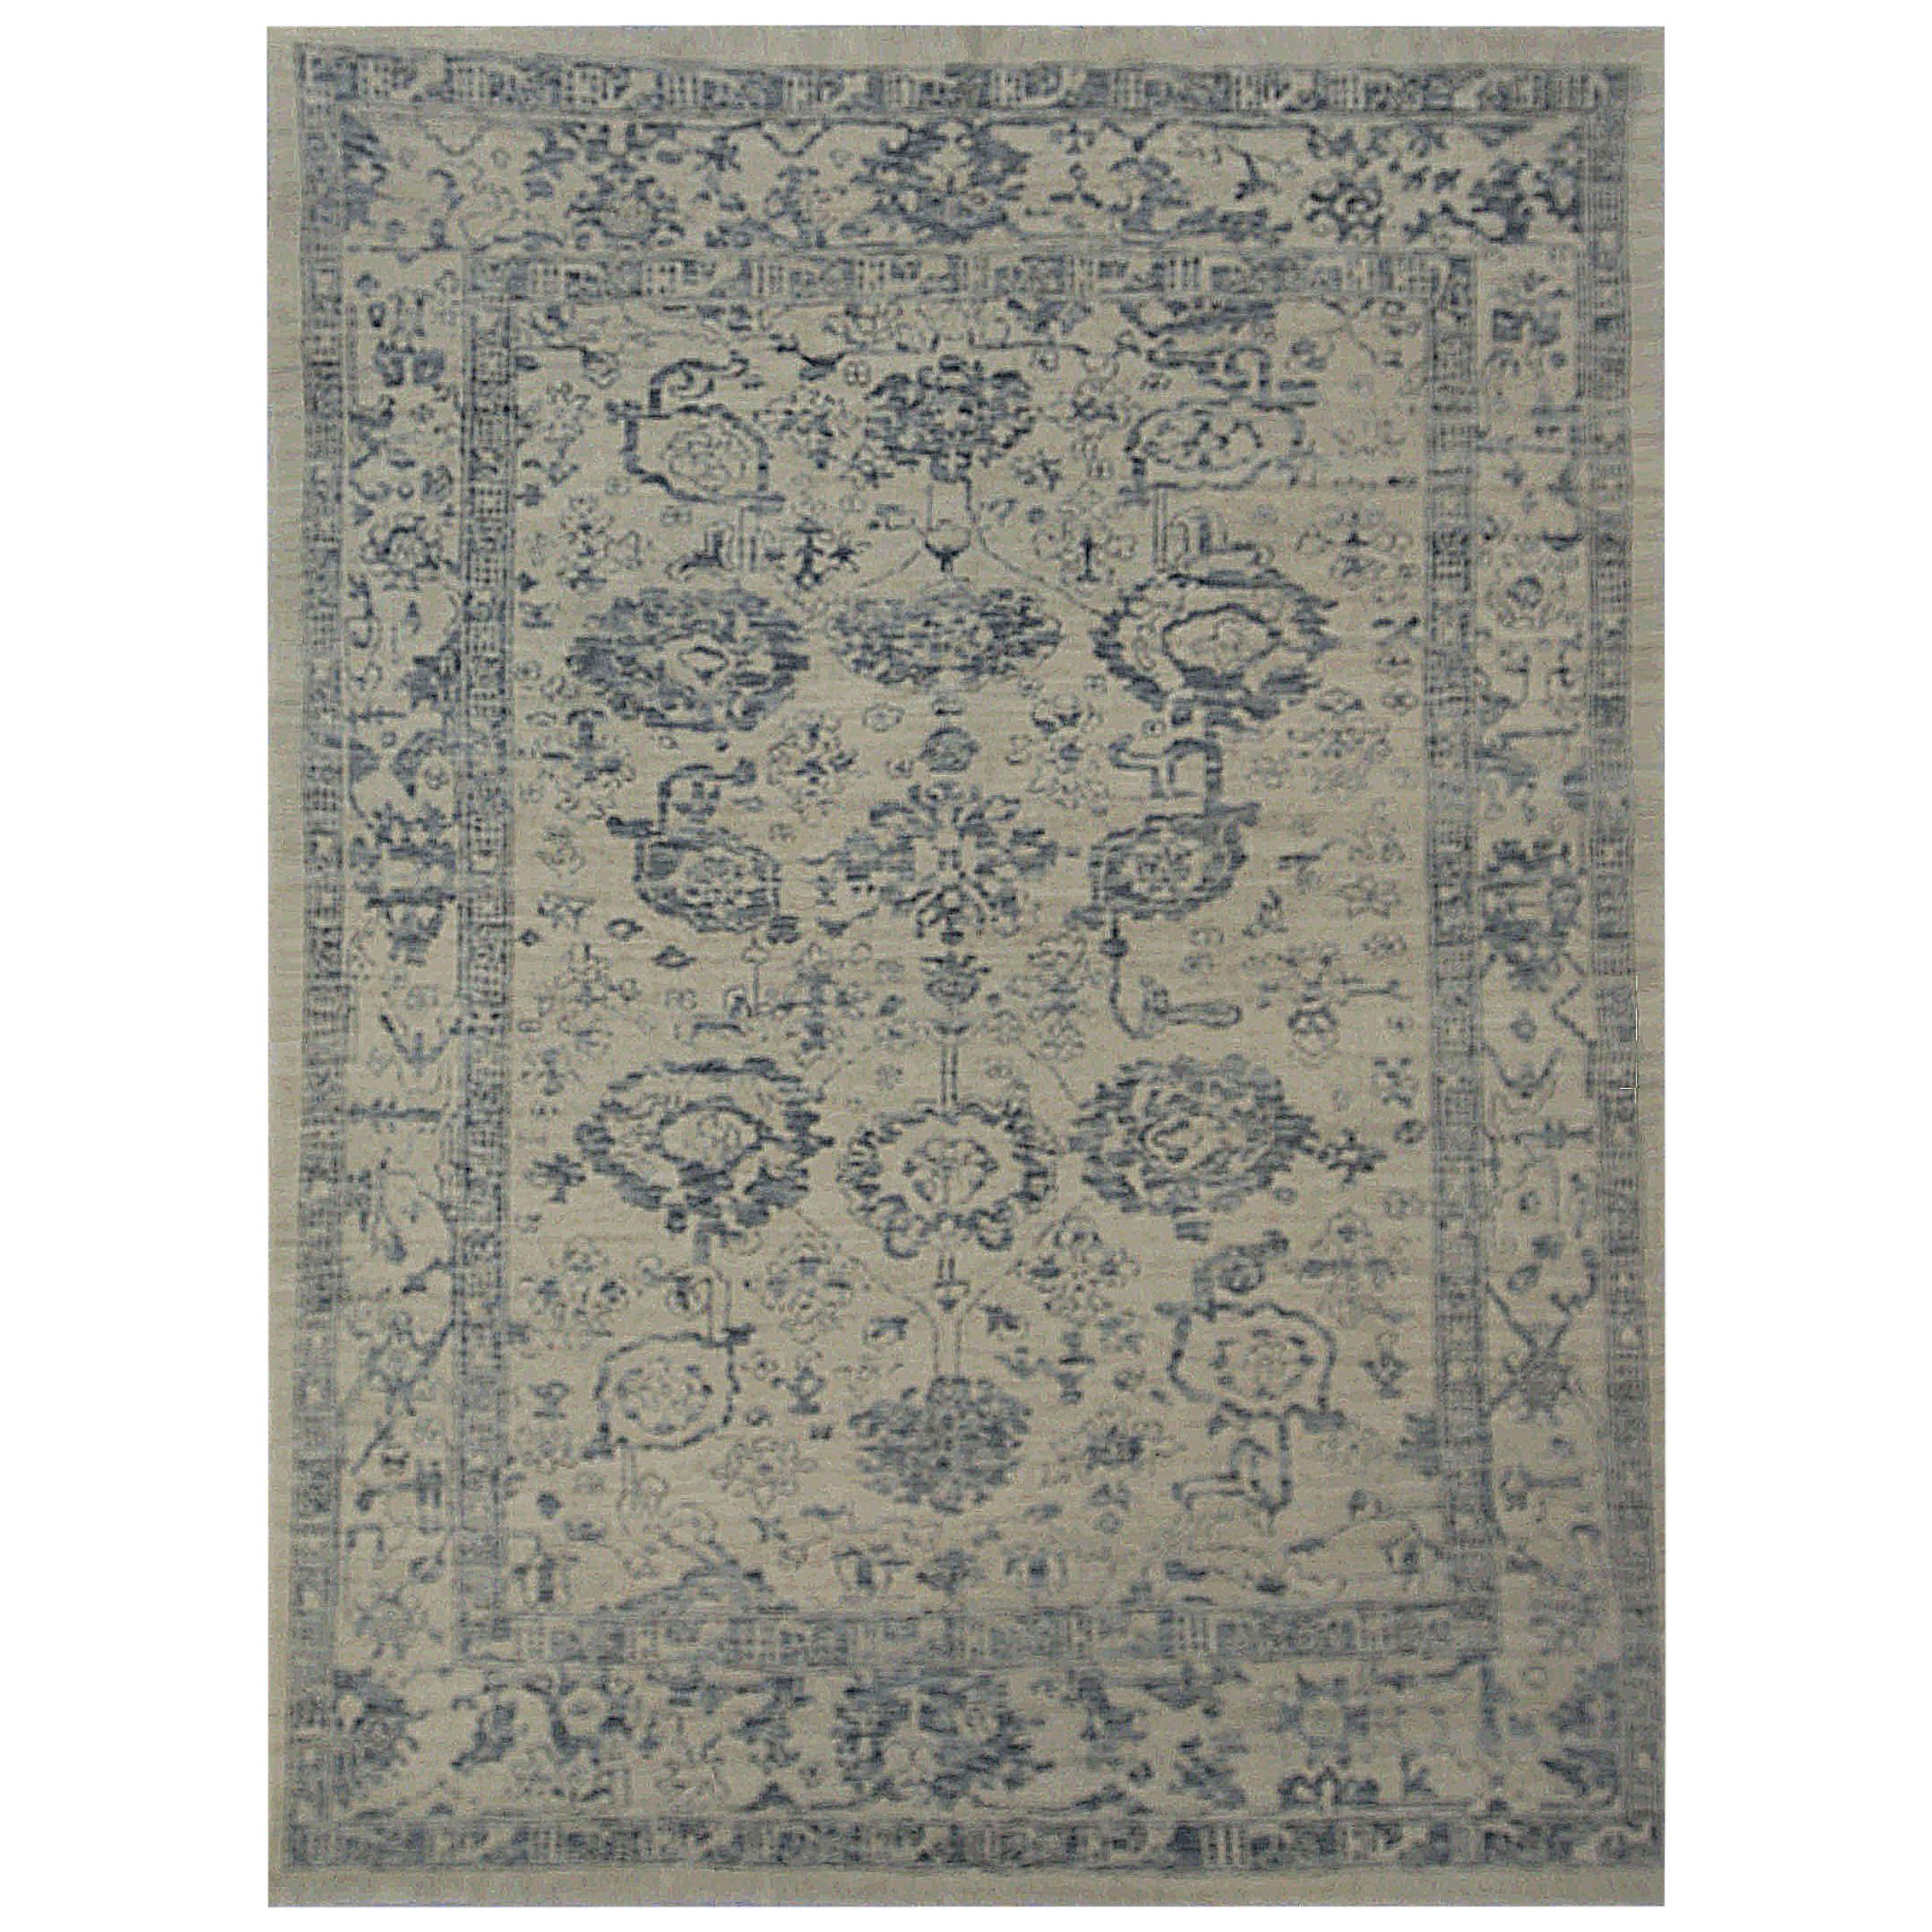 Modern Oushak Rug with Floral Details in Navy and Gray on Beige Ivory Field